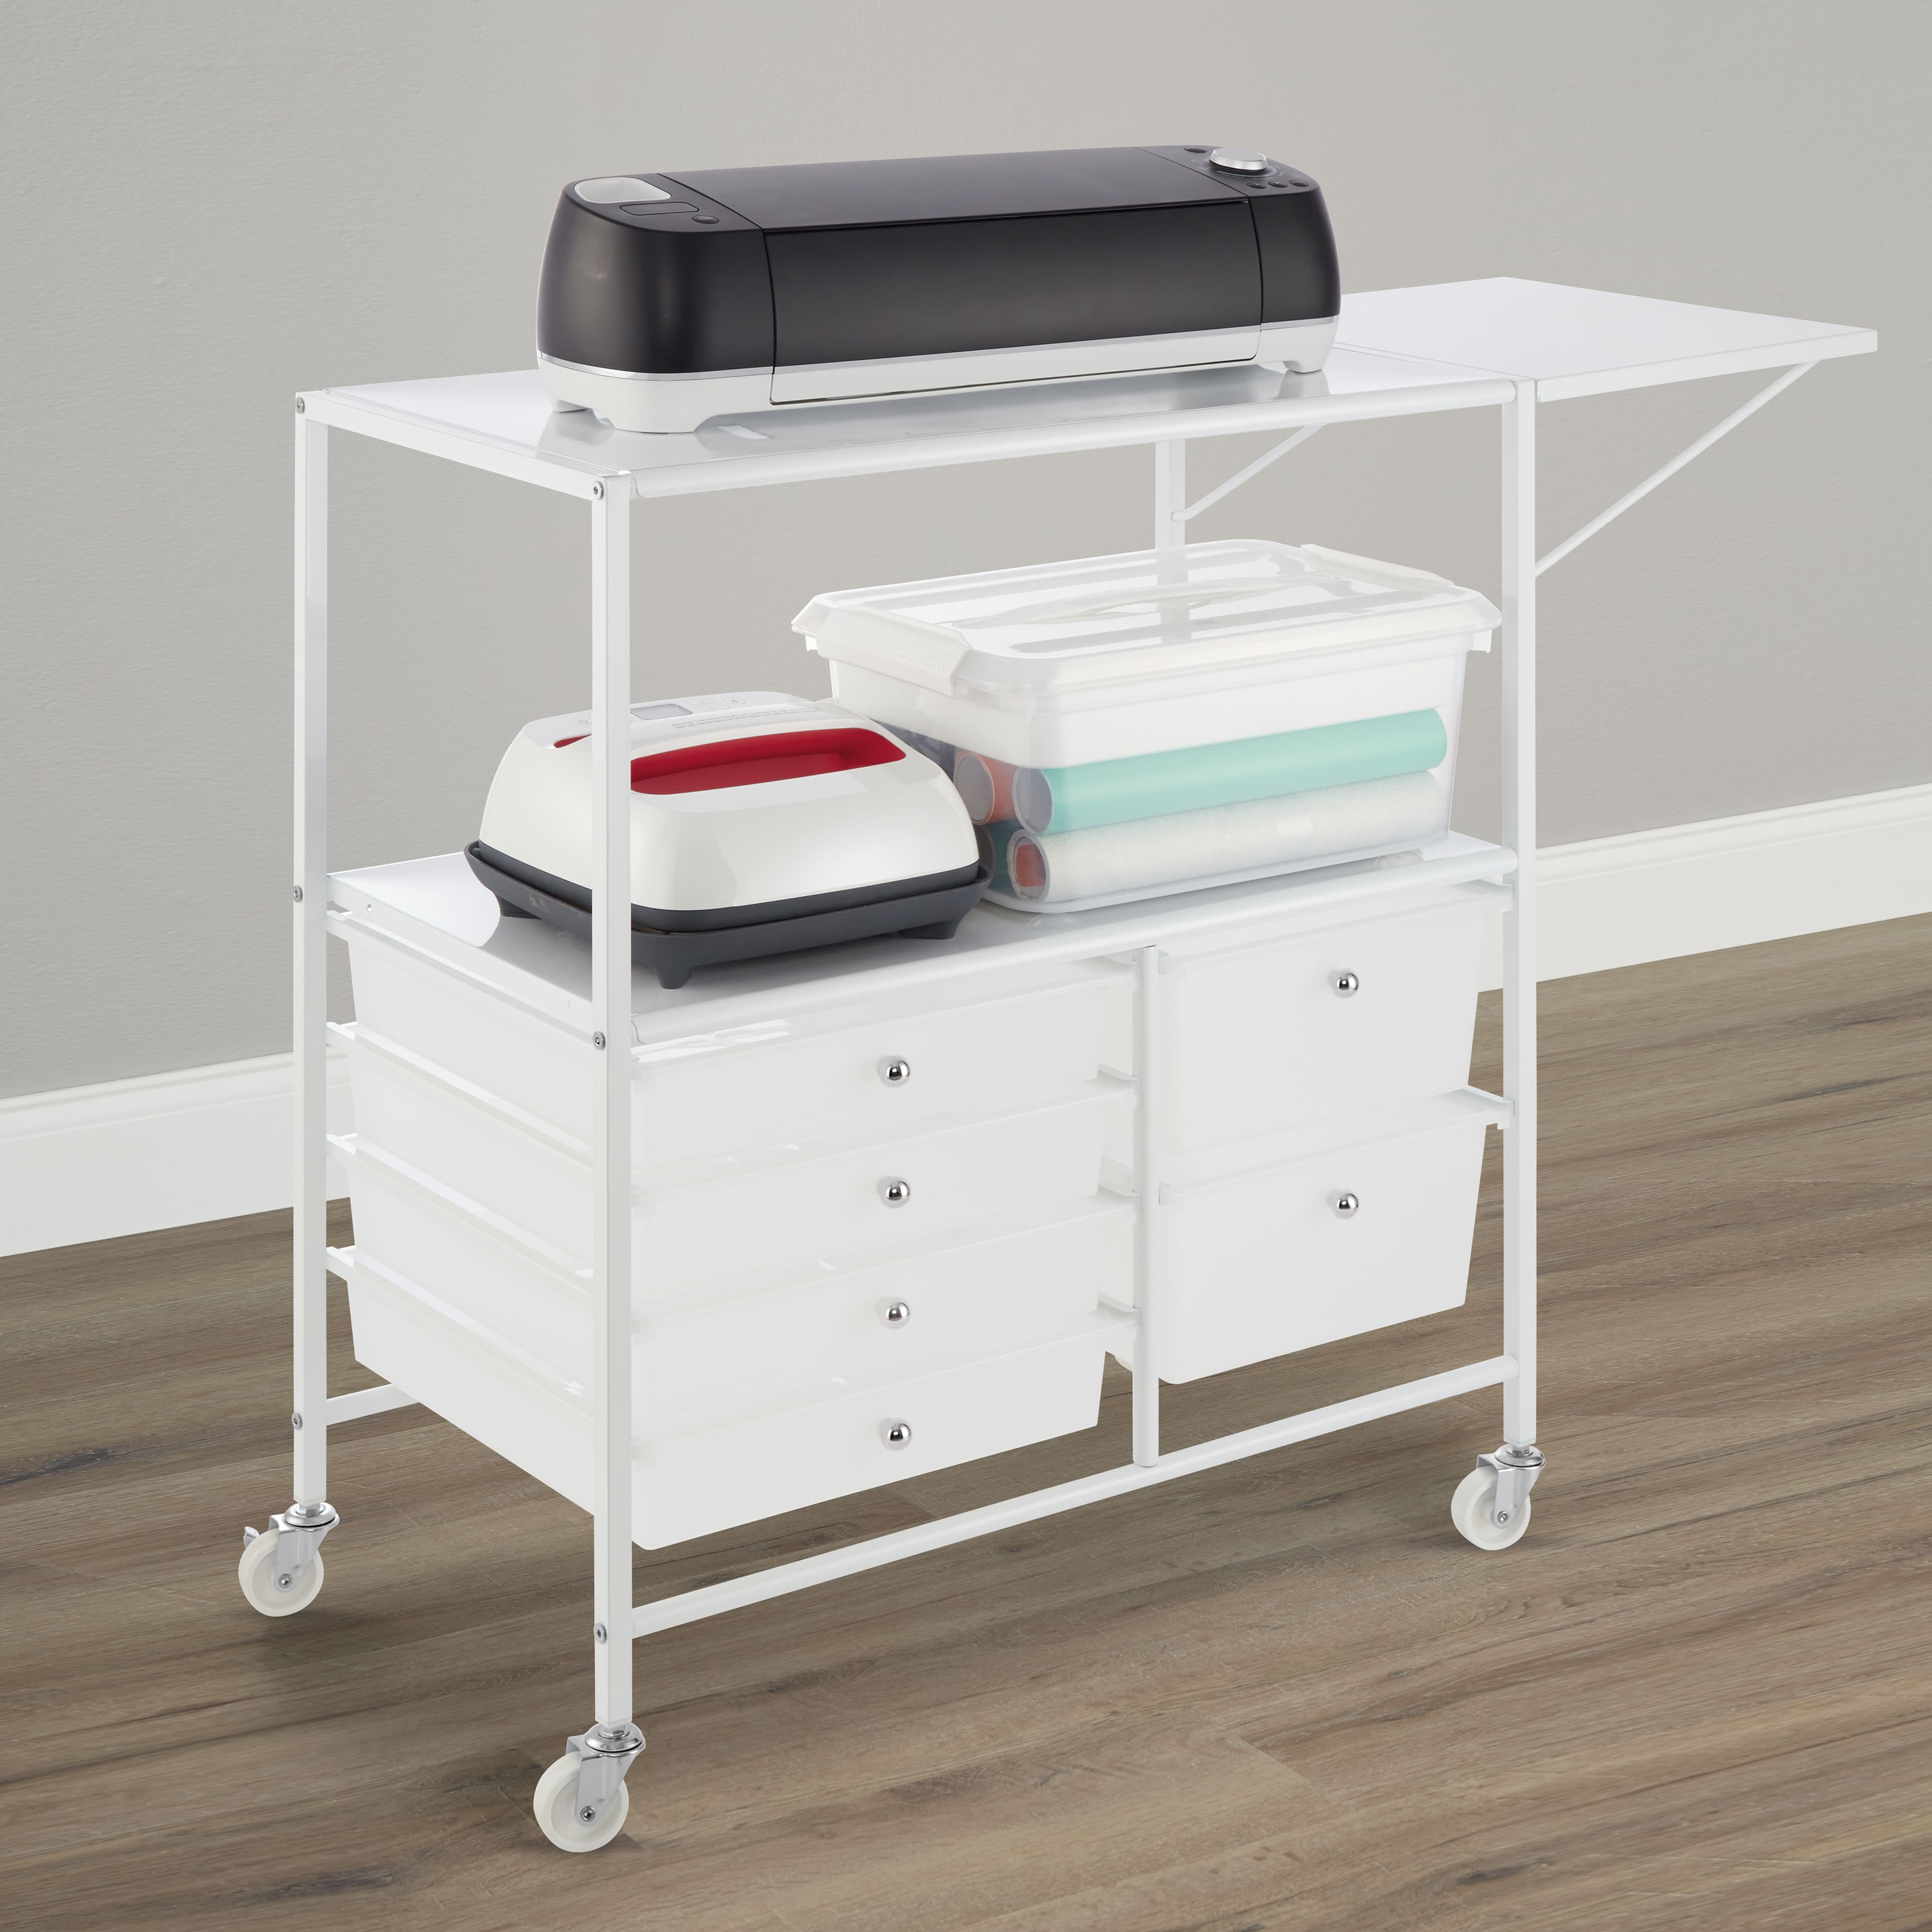 MICHAELS Essex Rolling Cart by Simply Tidy™ - 2